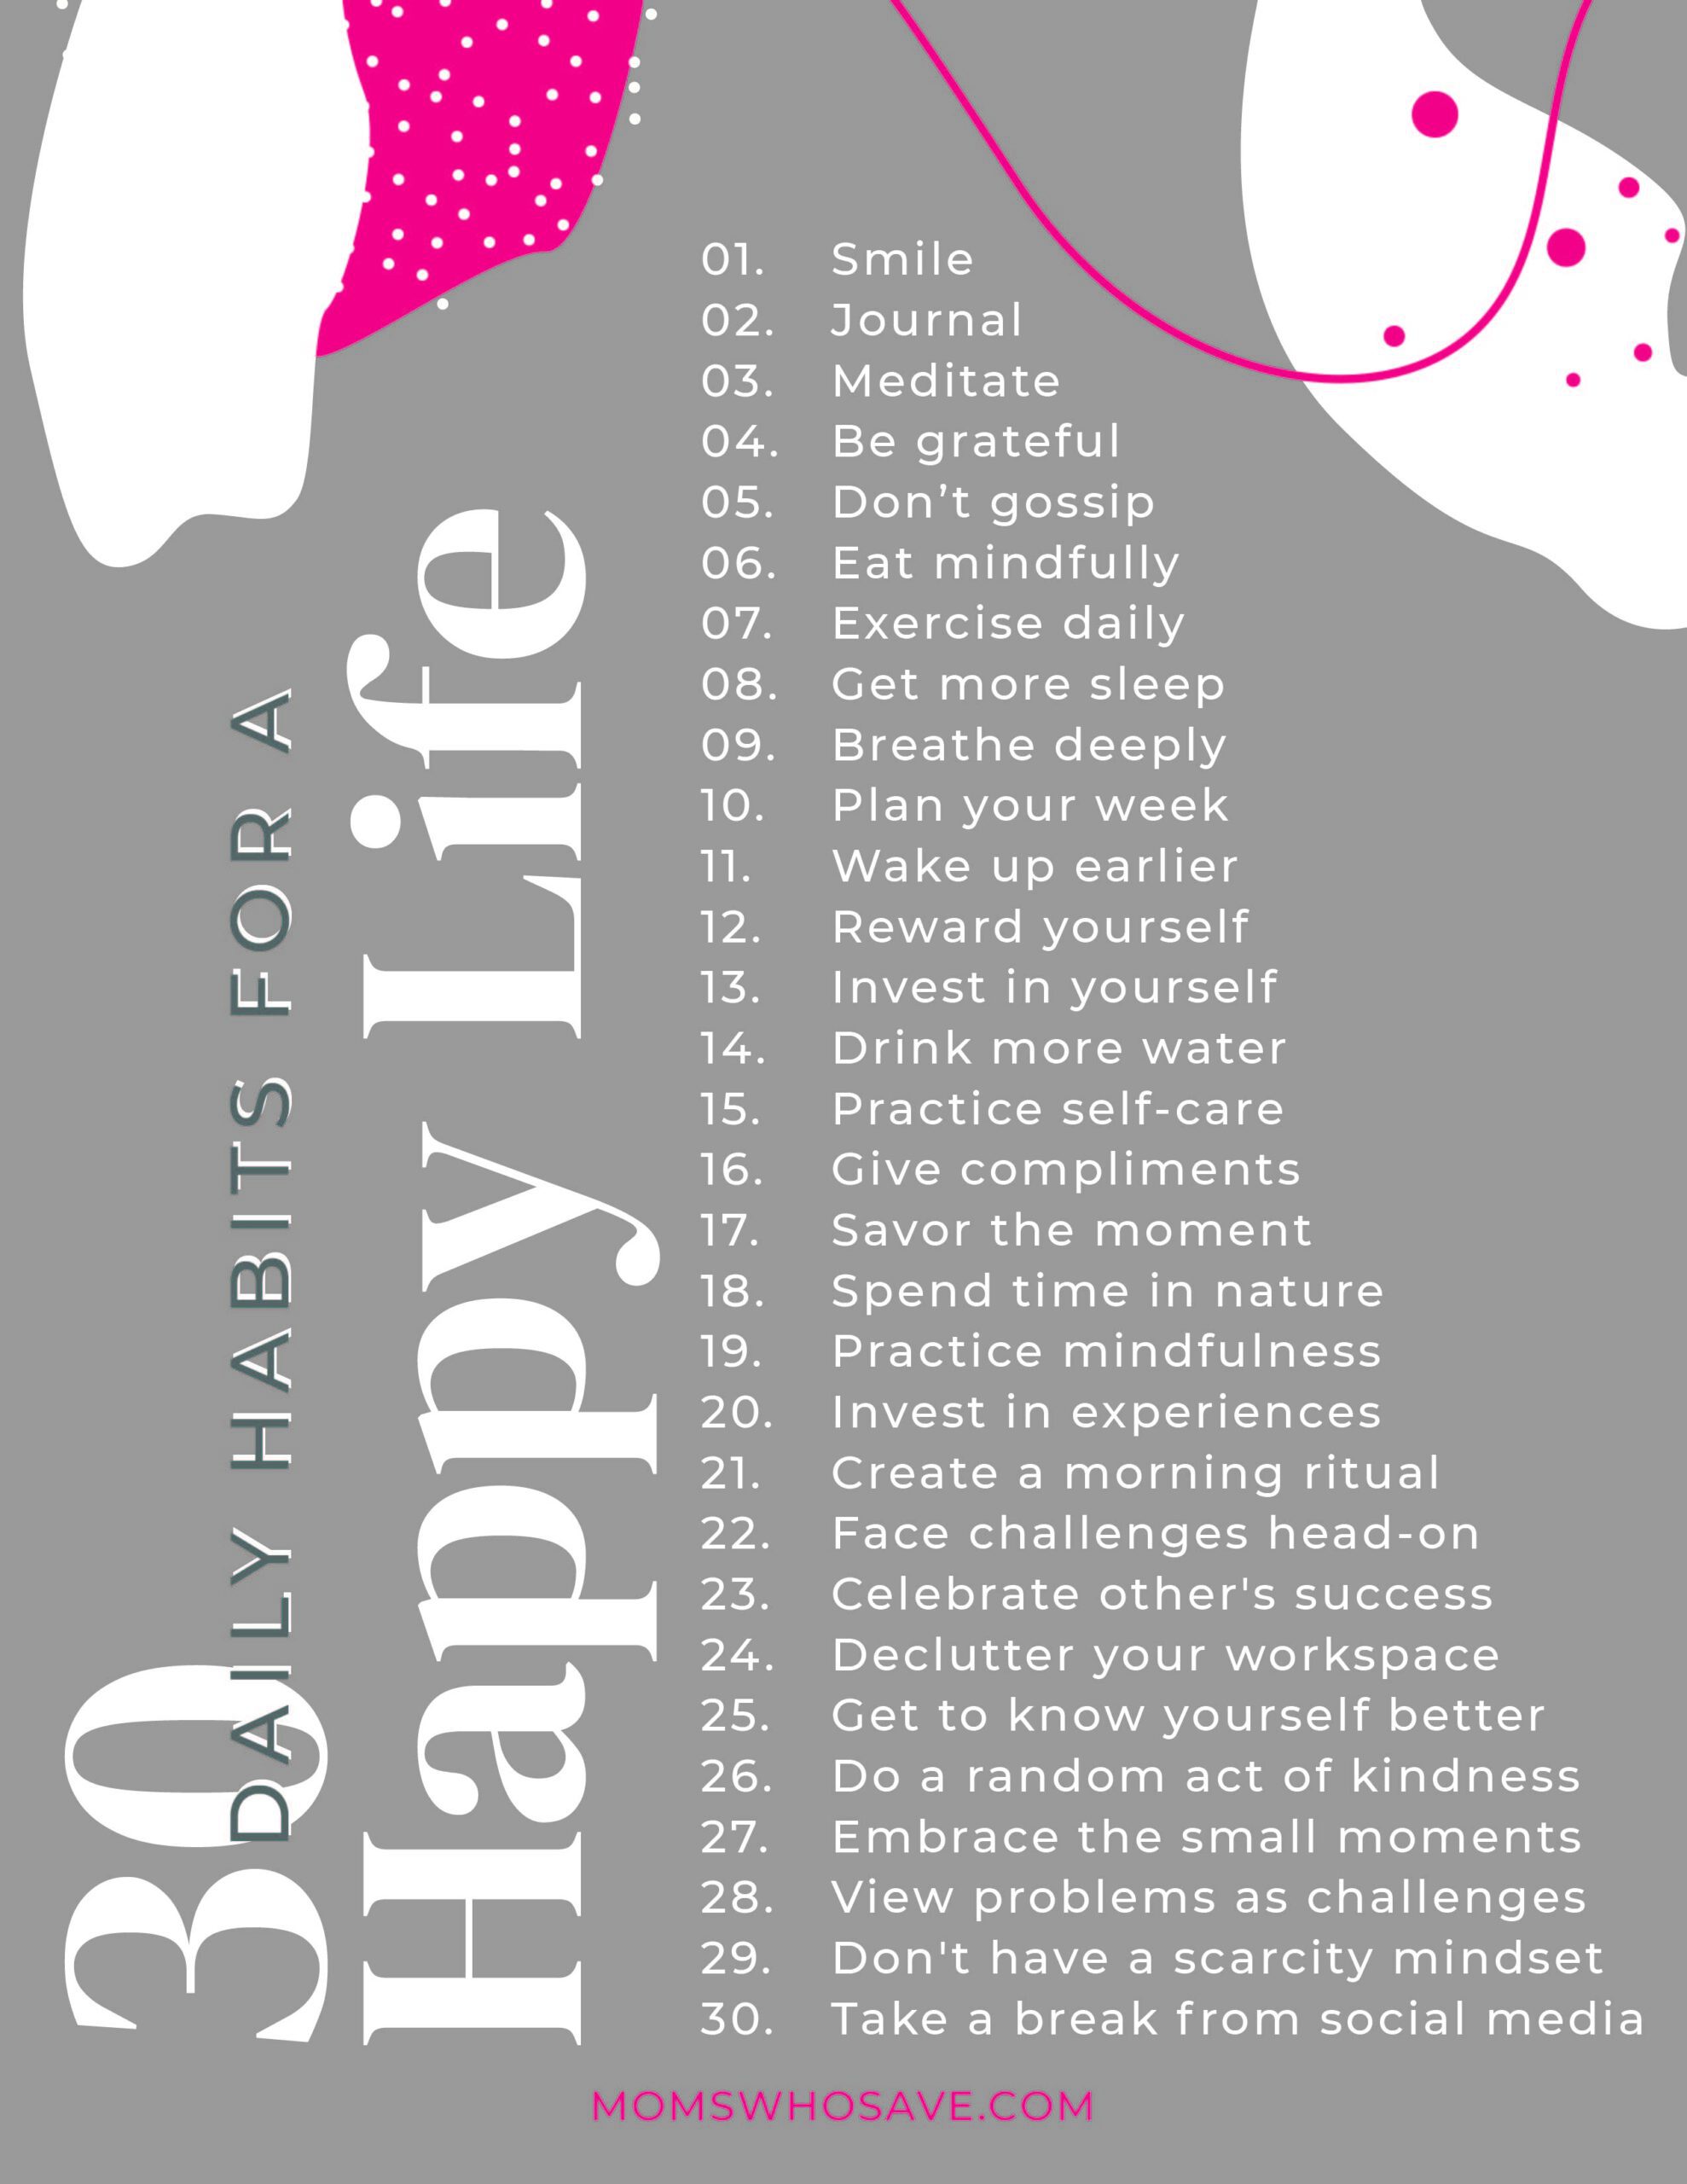 Daily Habits for Happiness